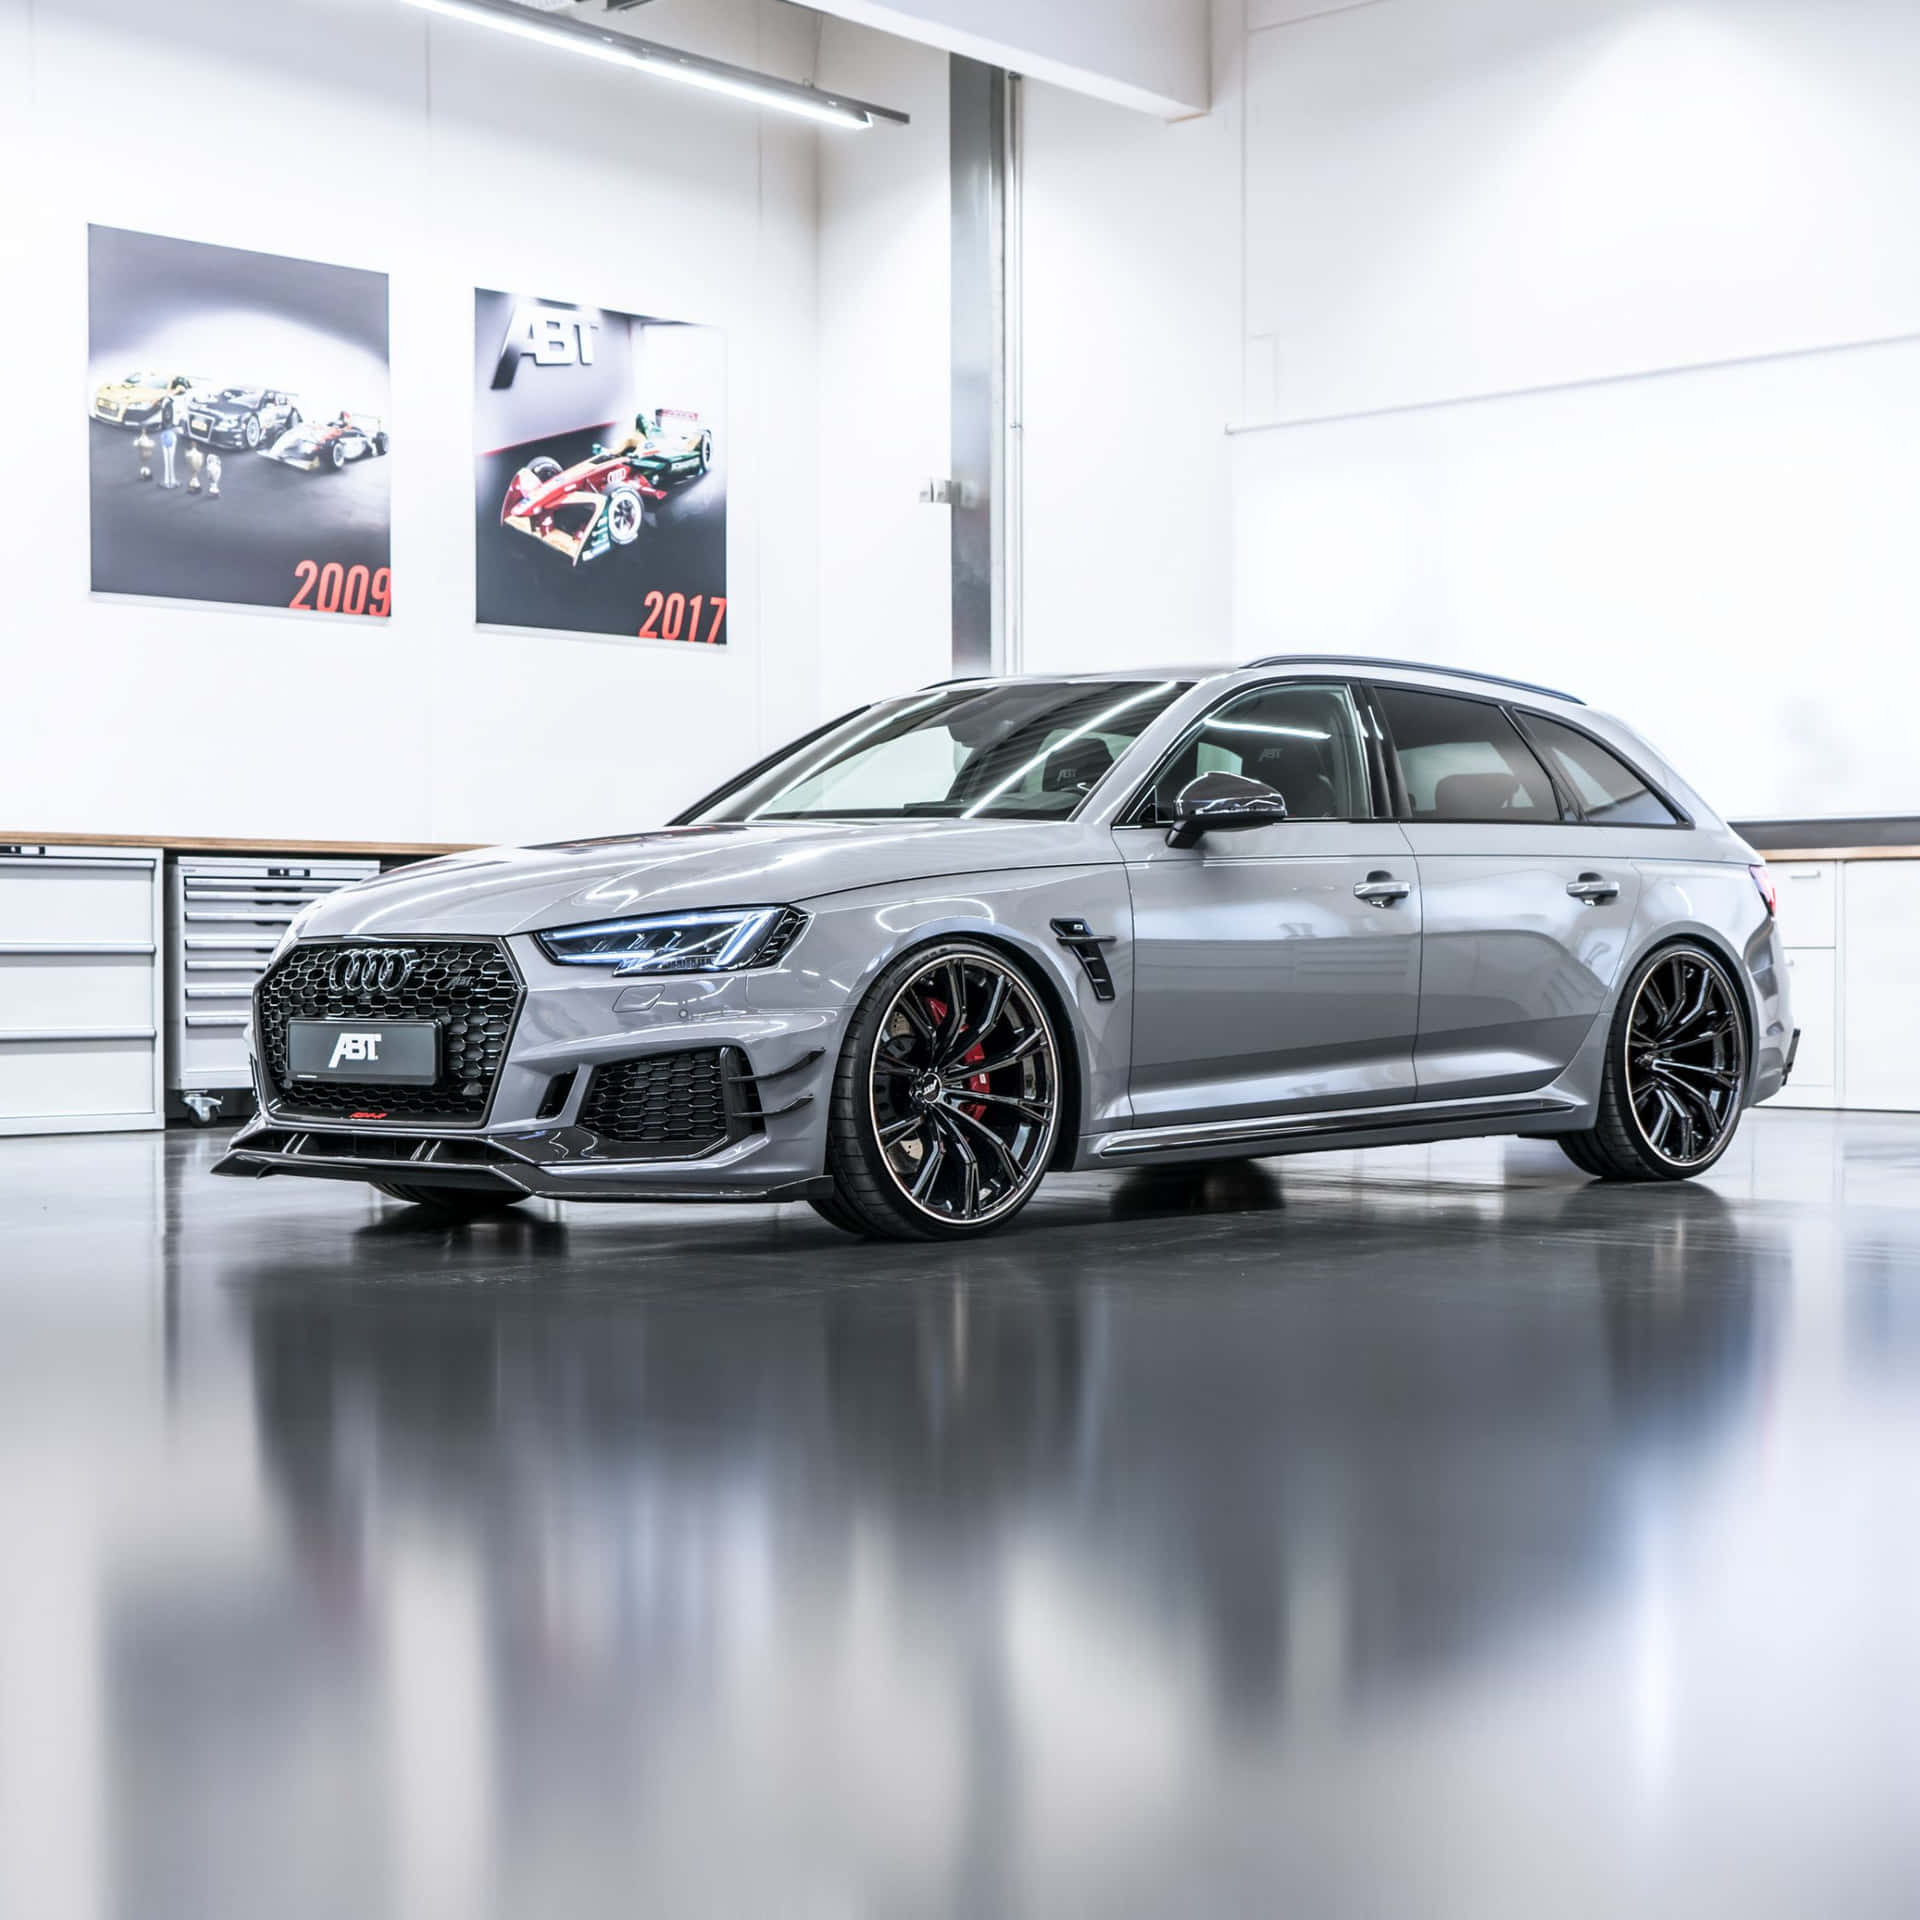 Unleashing Power and Design - The Spectacular Audi RS5 Wallpaper